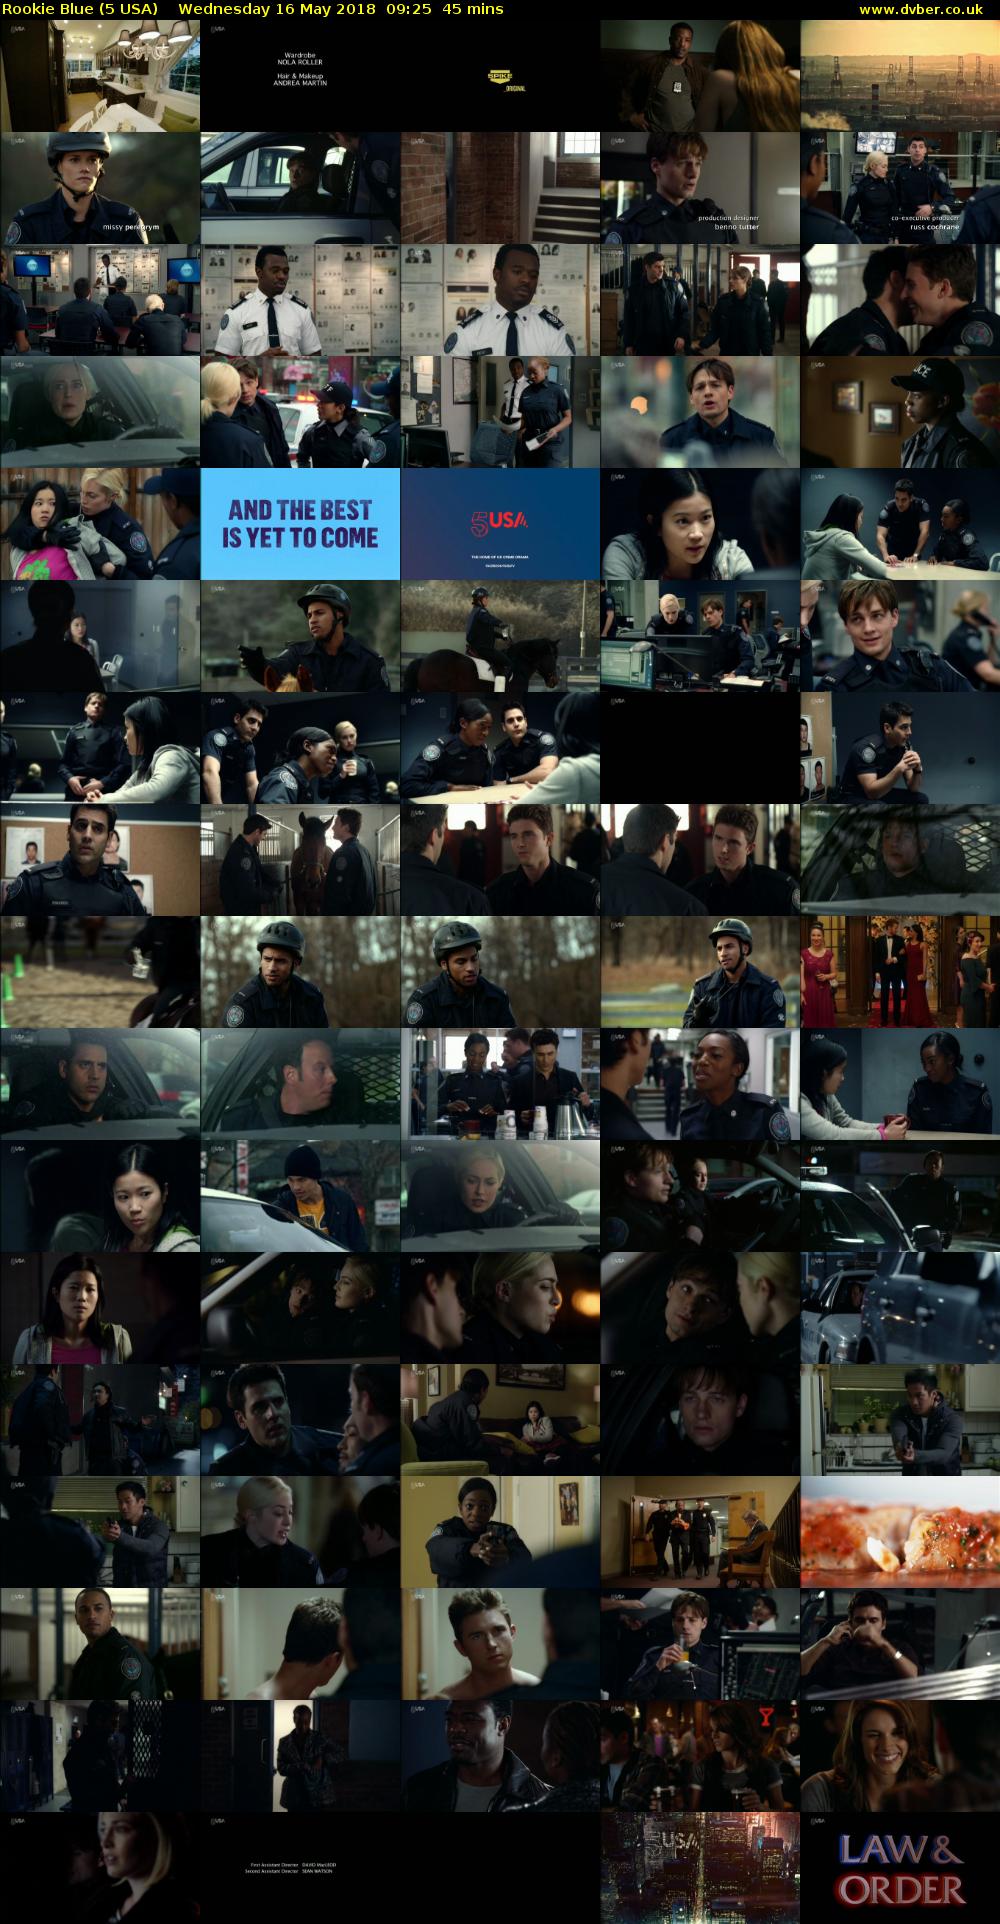 Rookie Blue (5 USA) Wednesday 16 May 2018 09:25 - 10:10